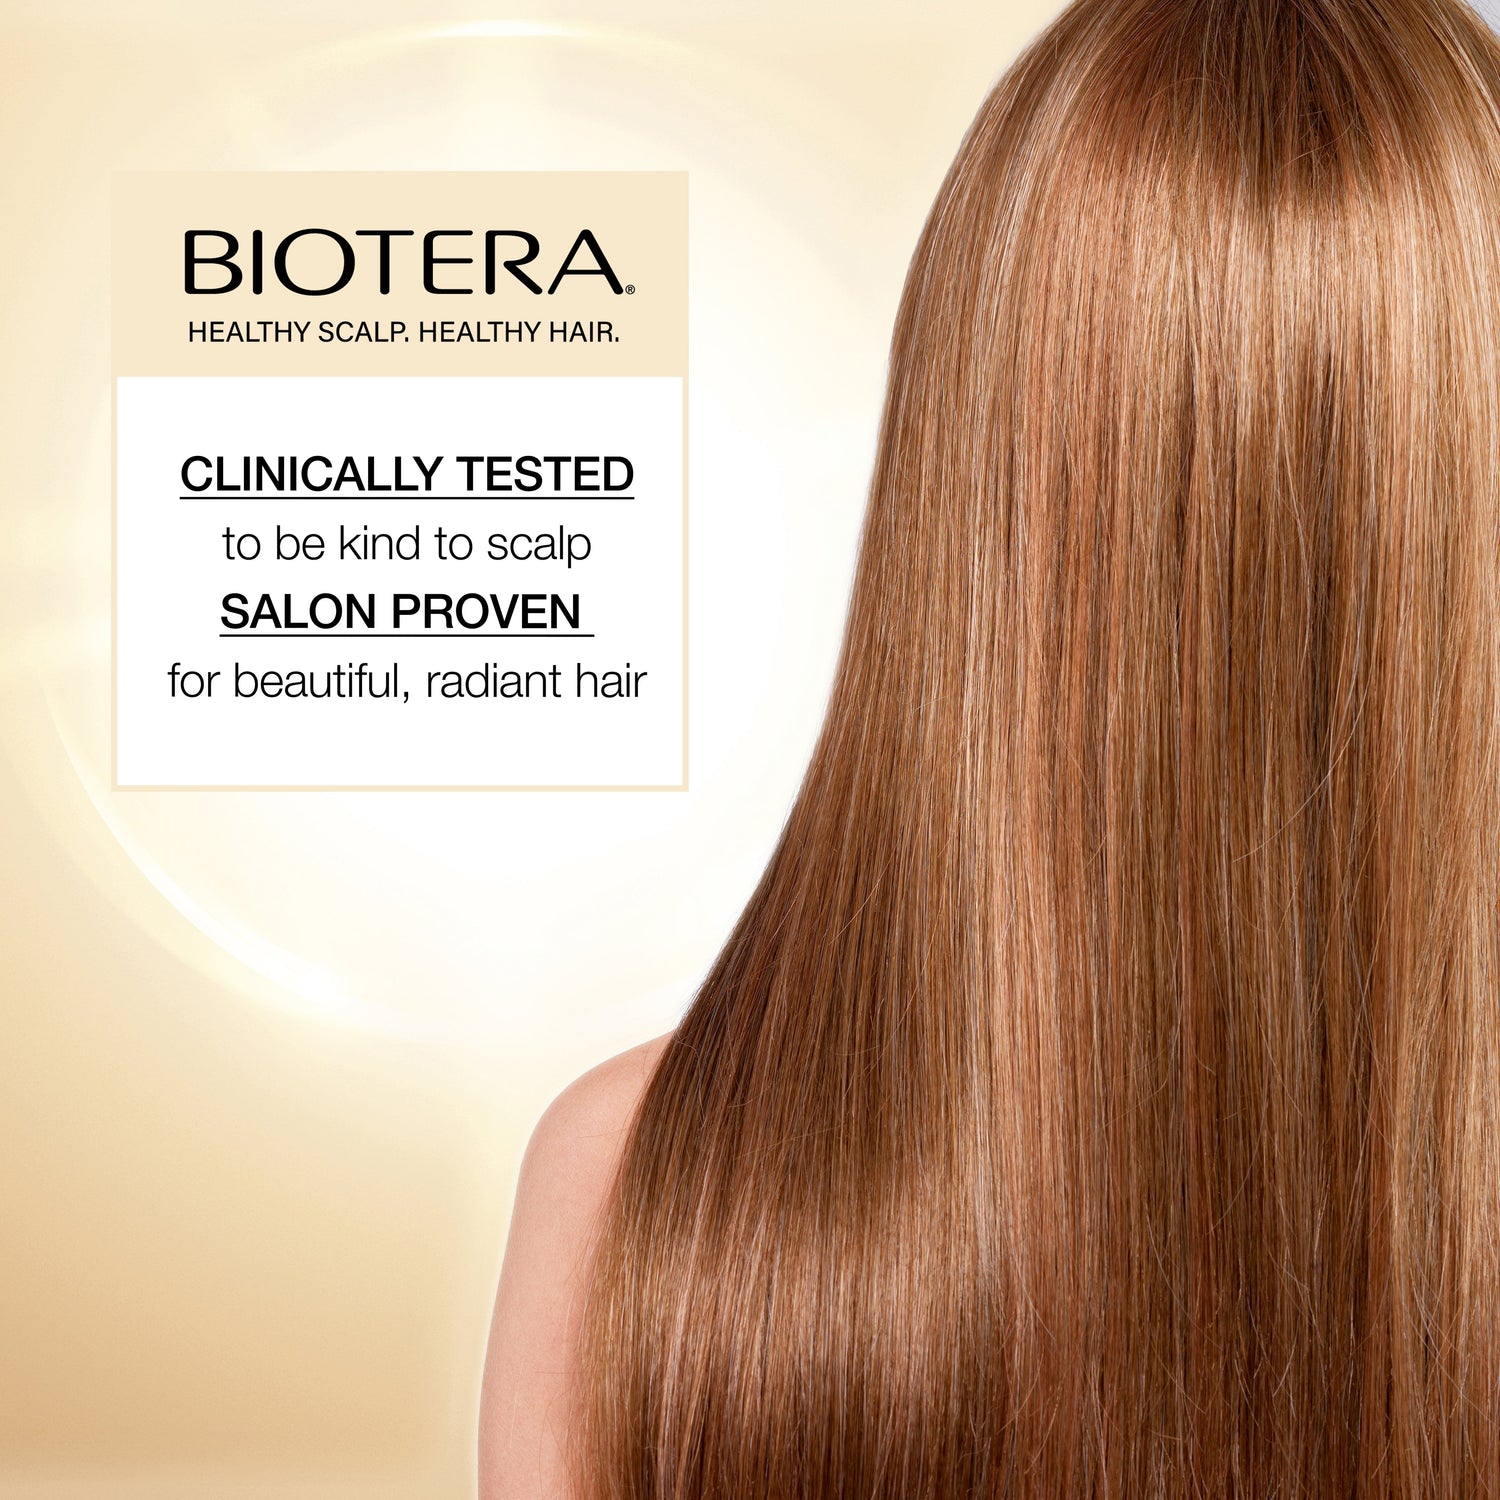 Biotera is clinically tested and salon proven.